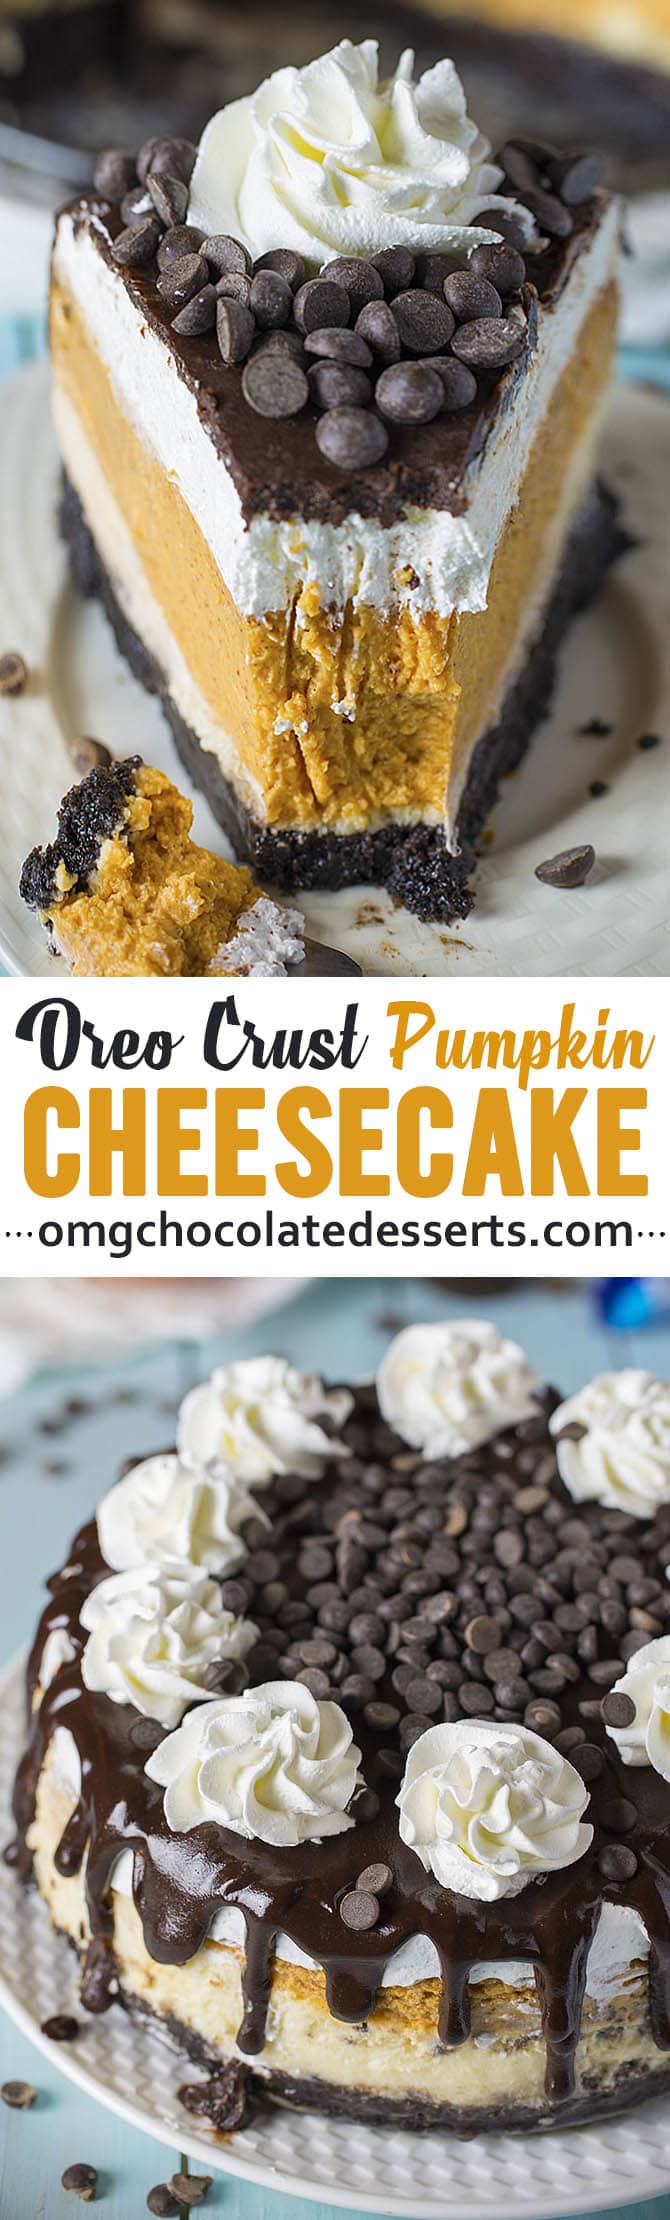 Pumpkin Cheesecake is a fluffy, creamy pumpkin cheesecake perfect for Thanksgiving! Easy to make with an Oreo base and beautiful fall flavours!